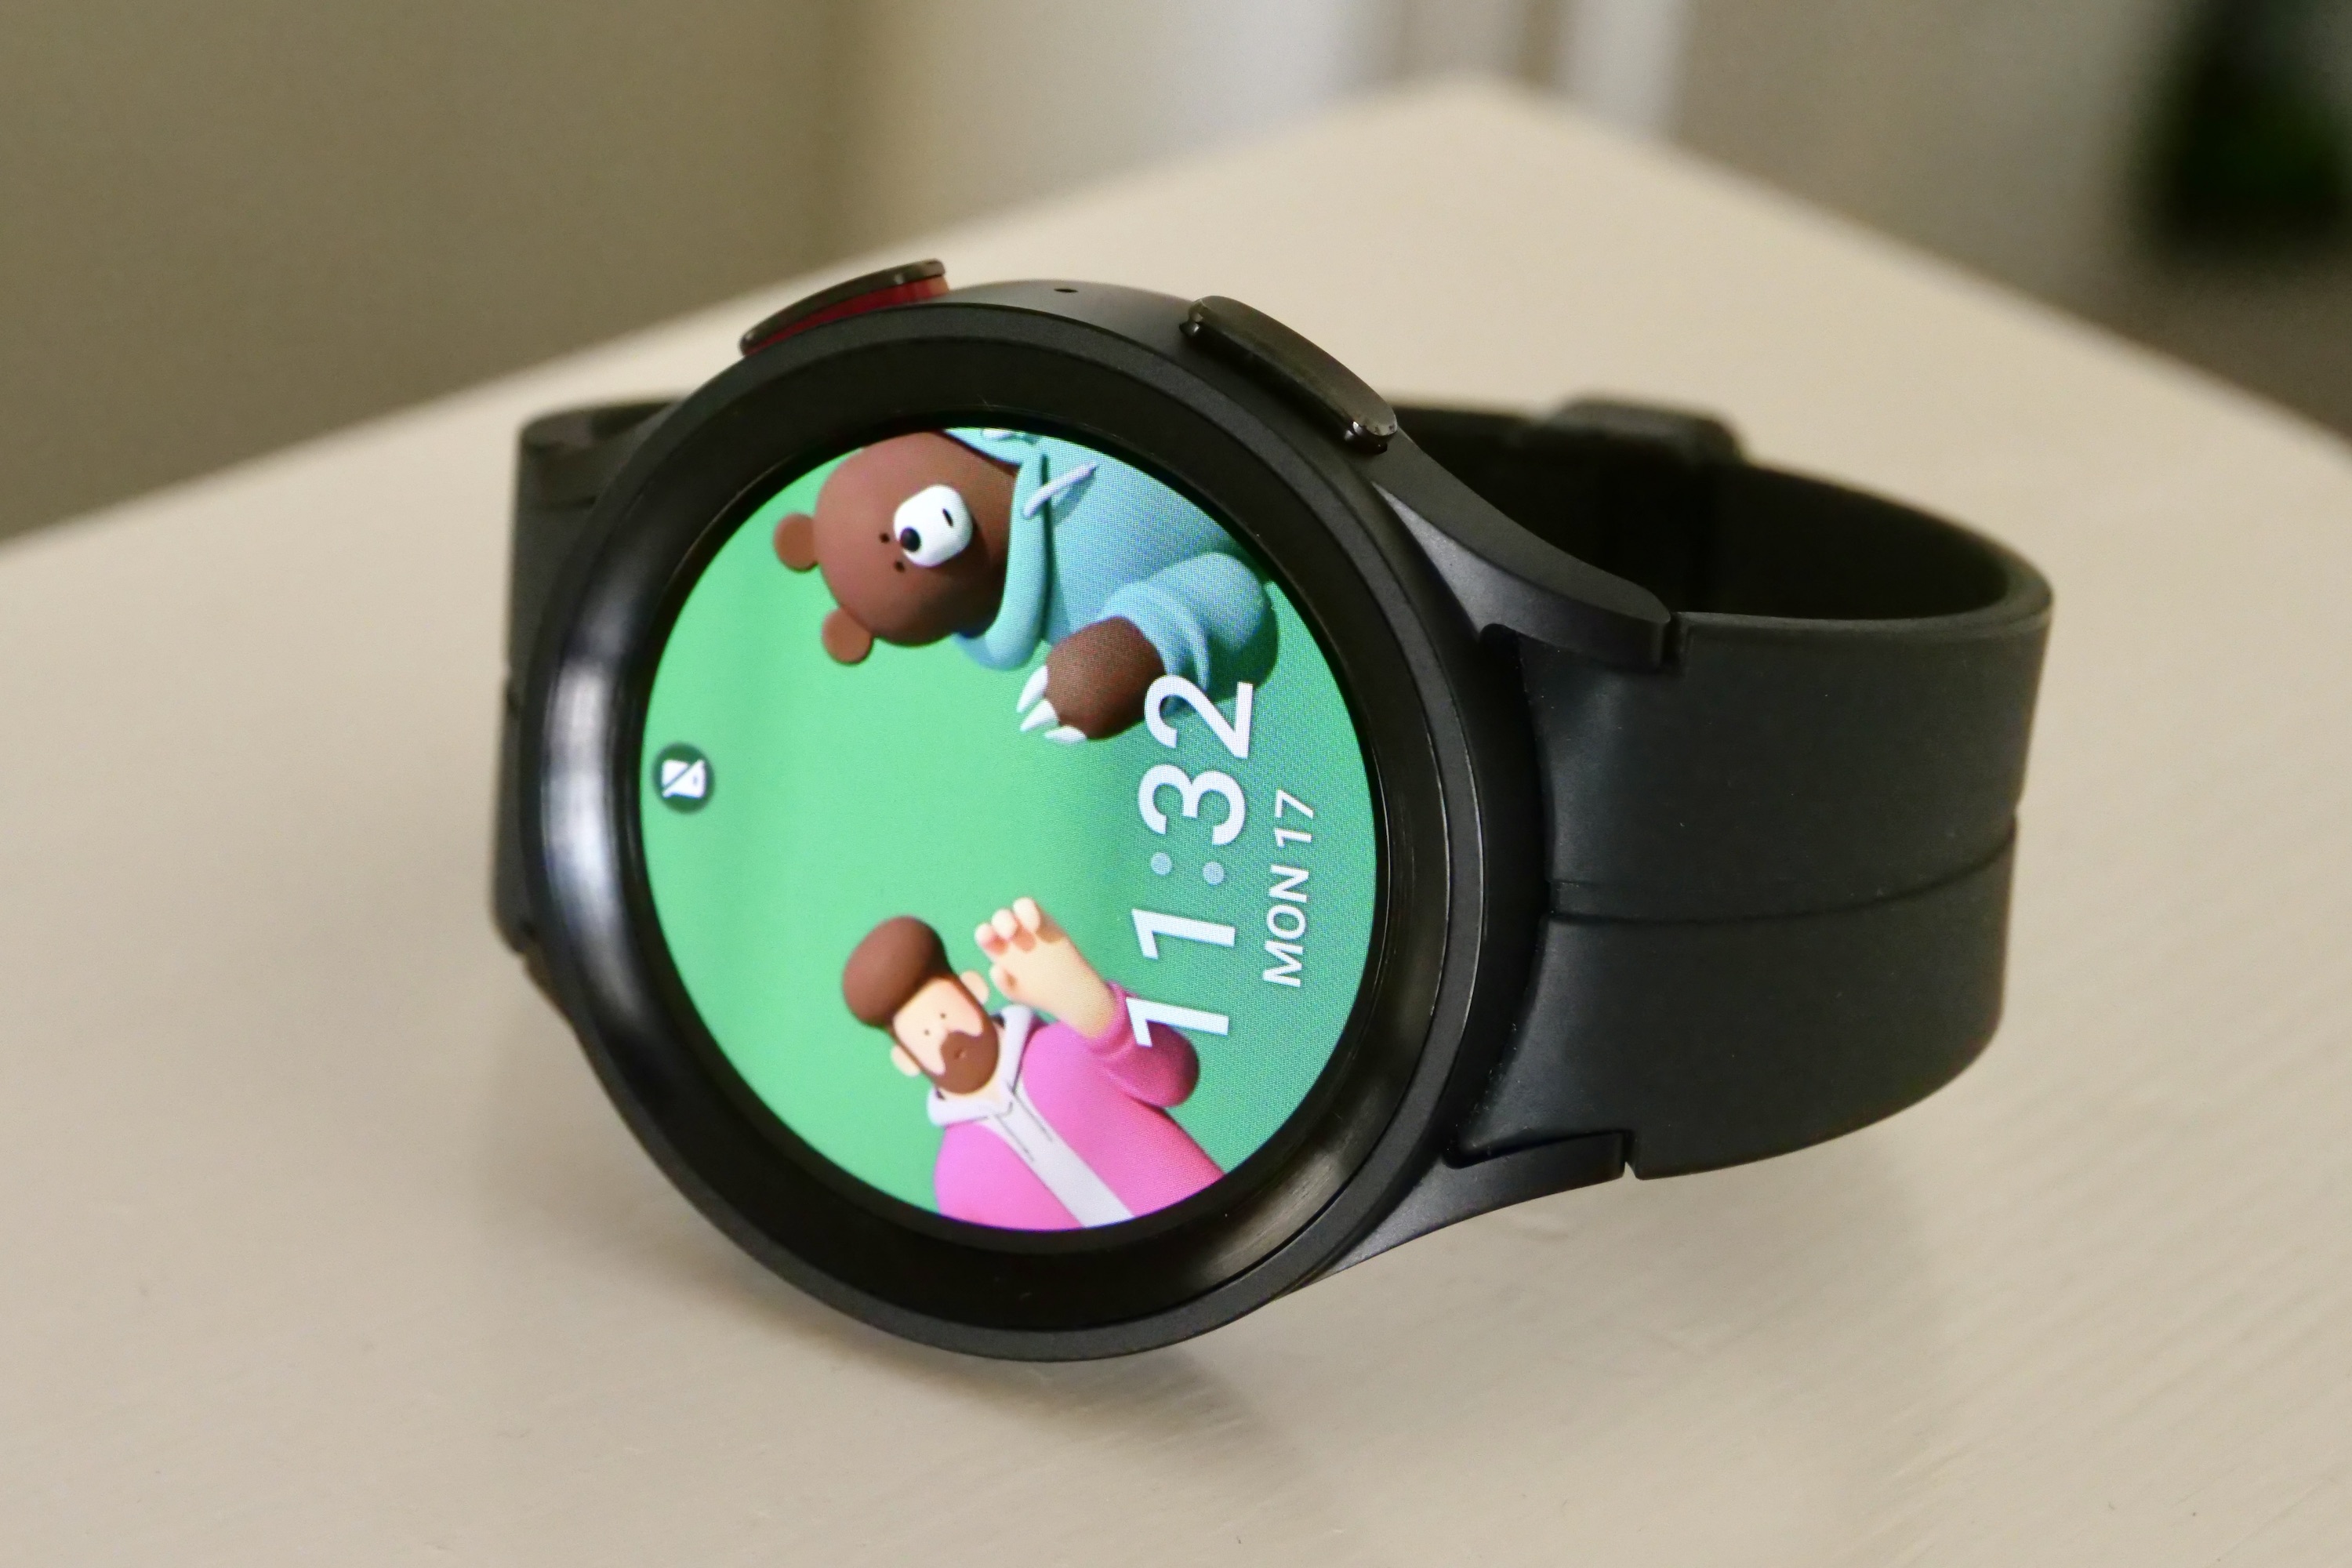 The Galaxy Watch 5 Pro with its cute "Bear" watch face.